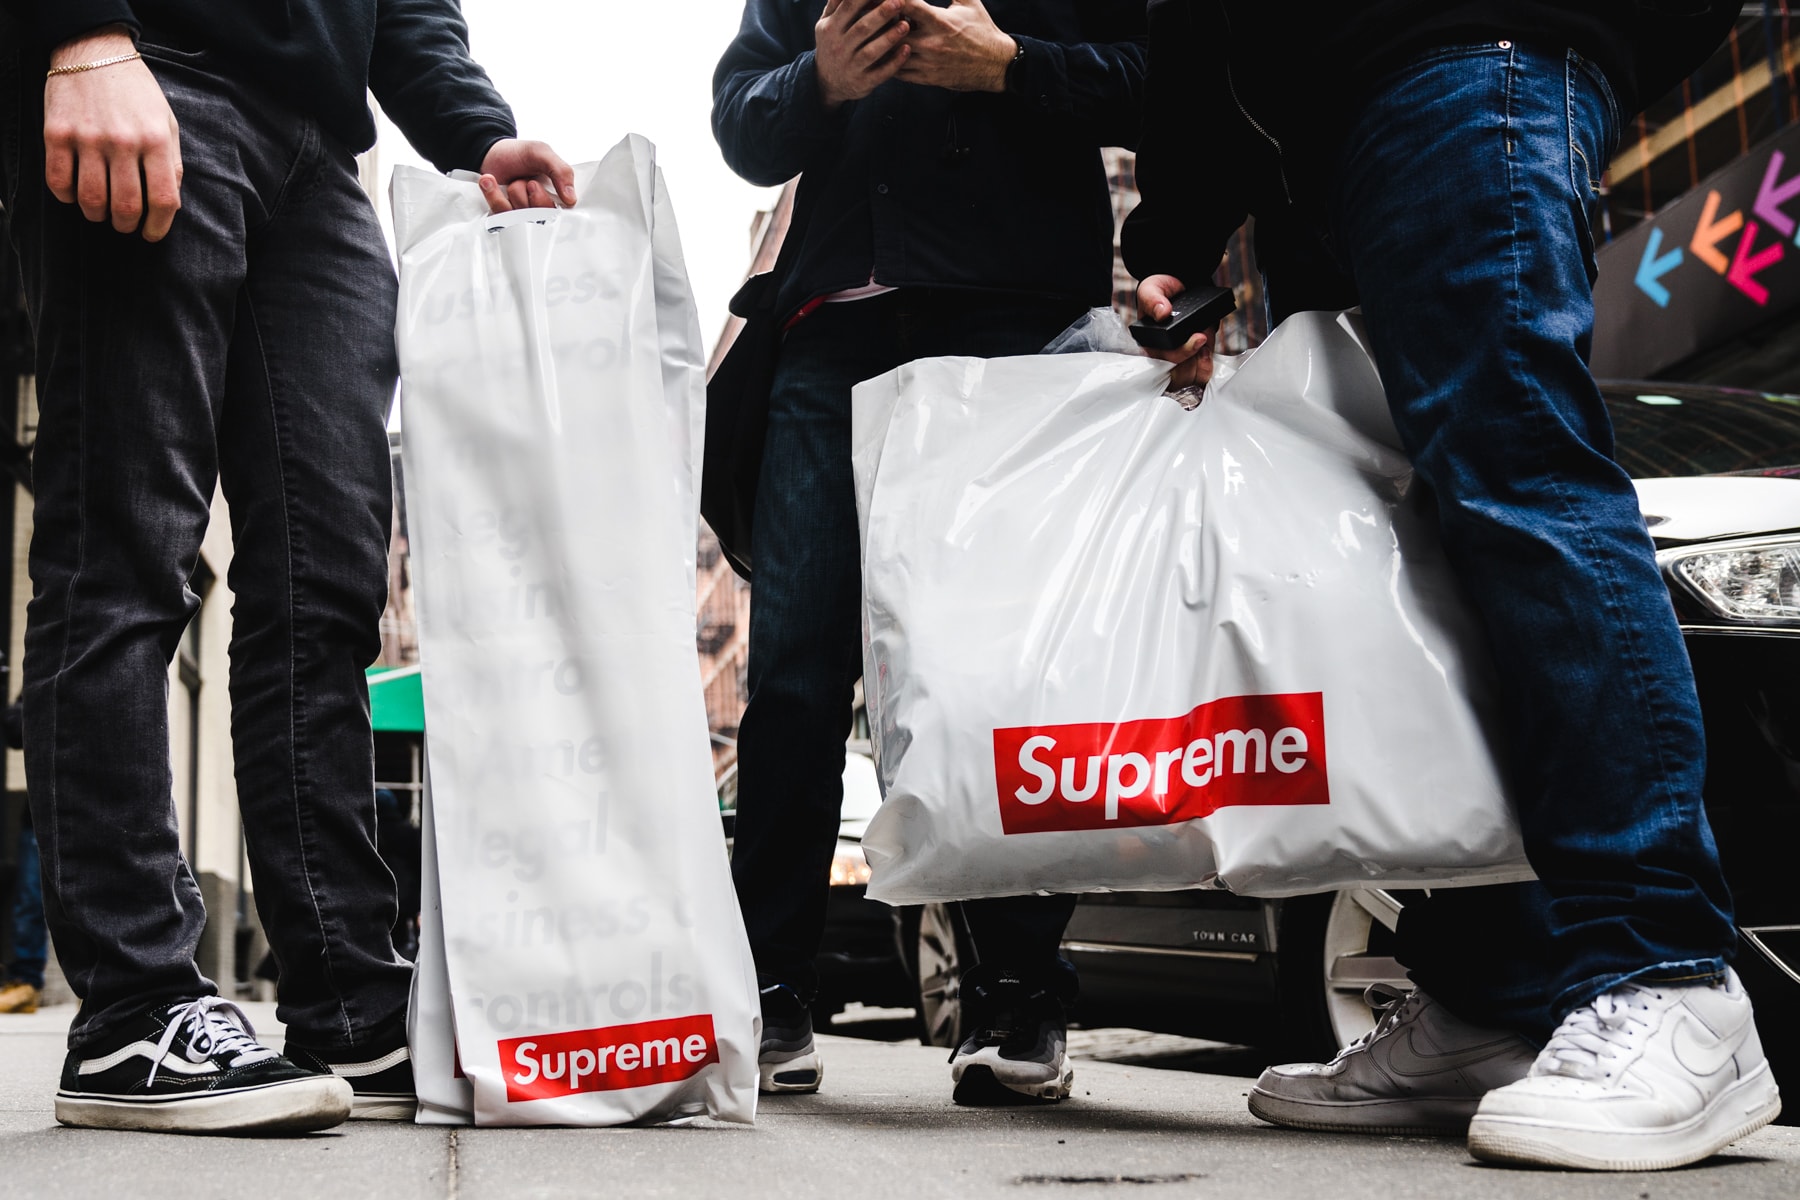 Supreme 2018 Spring/Summer 1 first drop street style snap new york brooklyn skull illegal business accessory deck